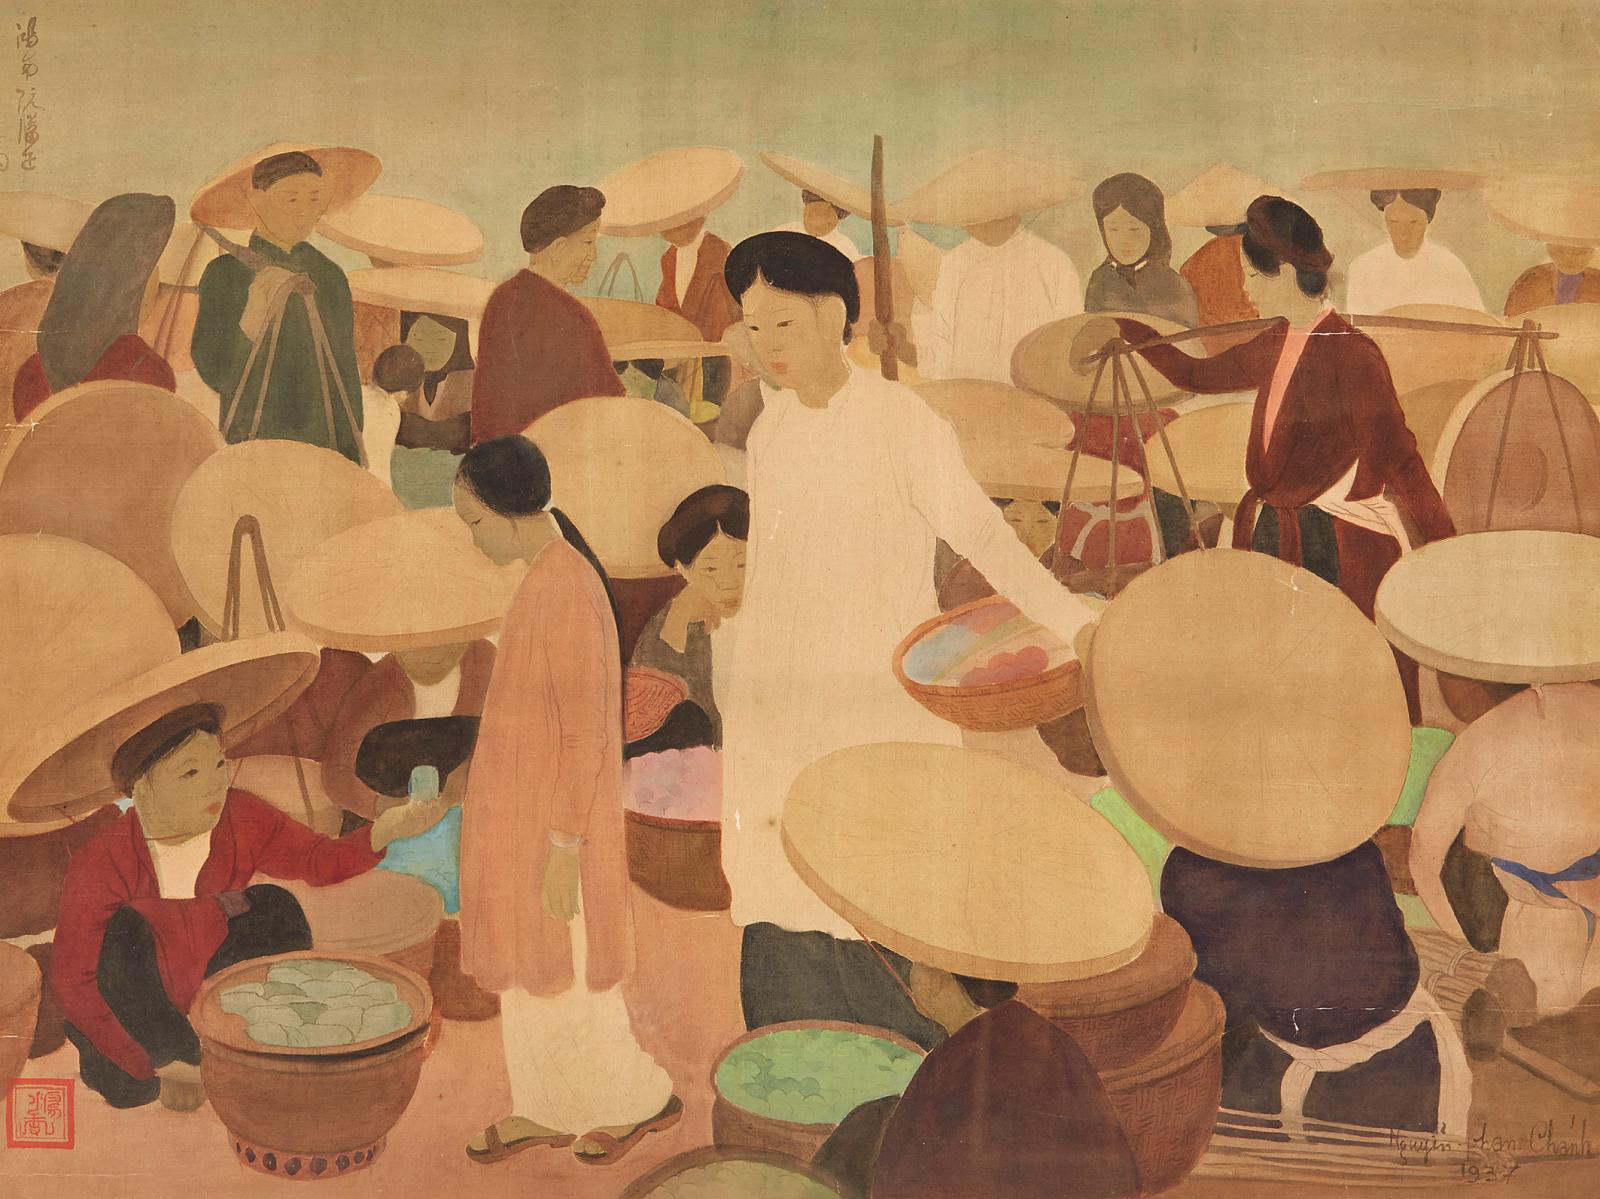 A French record for Vietnamese artist Phan Chanh